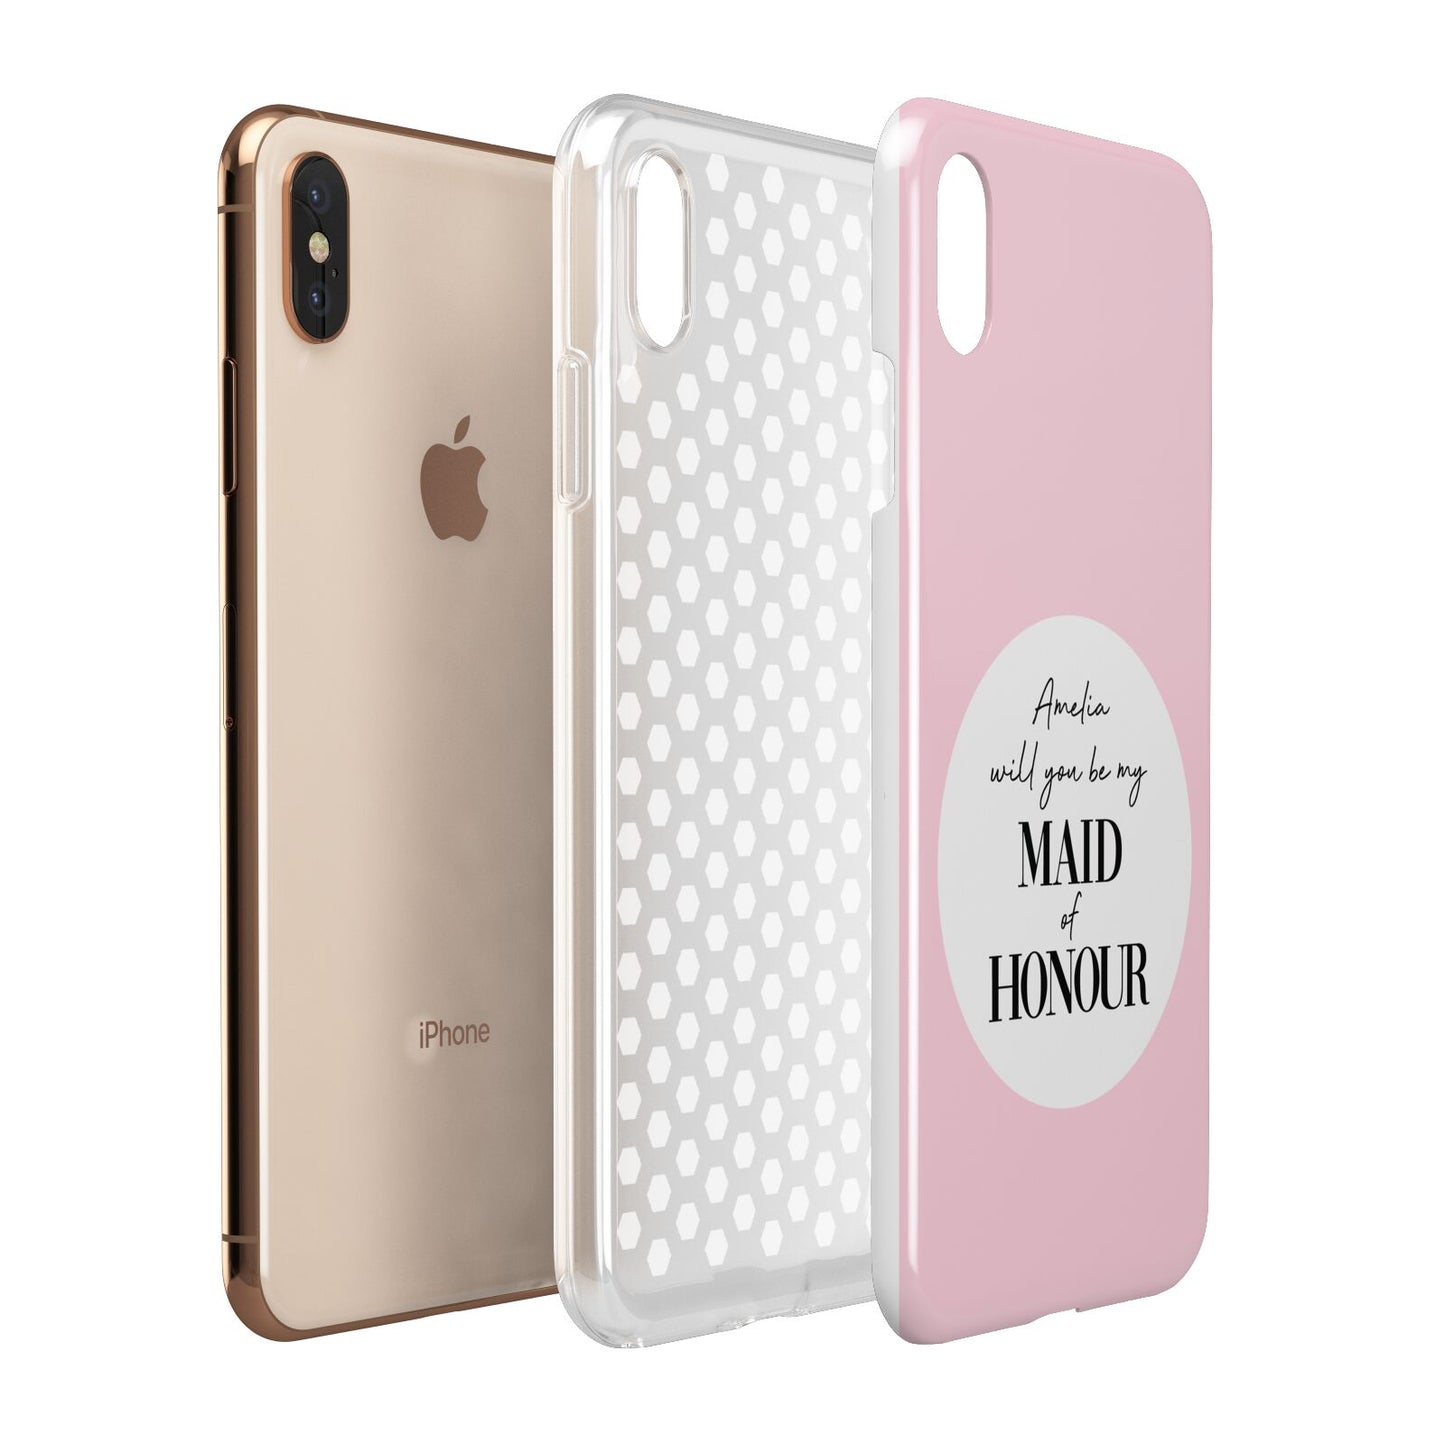 Will You Be My Maid Of Honour Apple iPhone Xs Max 3D Tough Case Expanded View